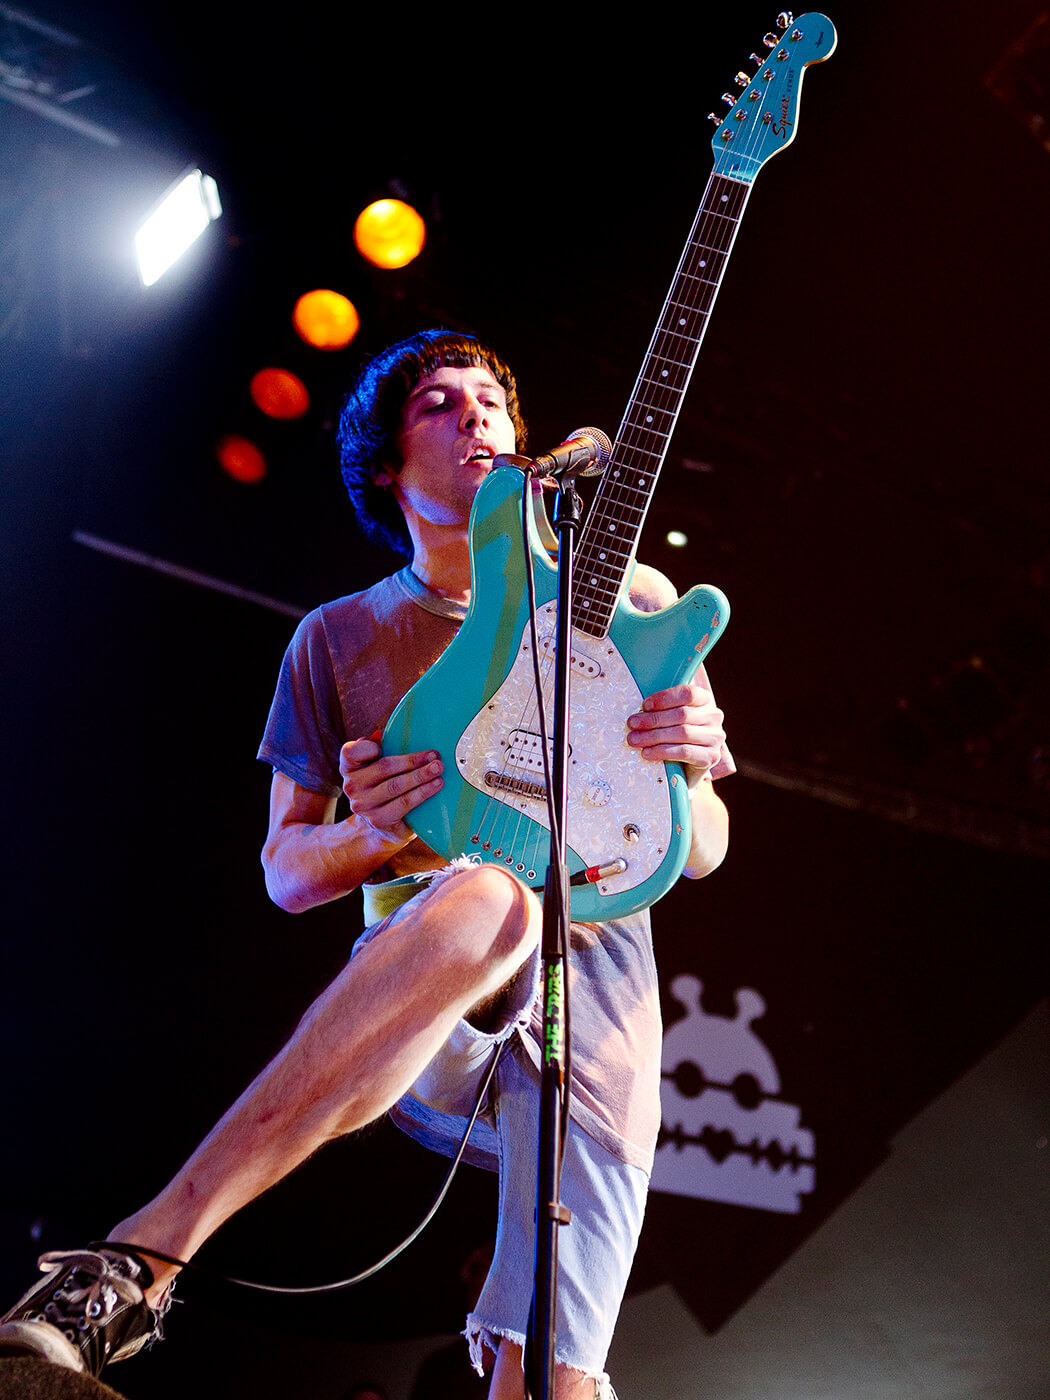 Ryan Jarman of The Cribs performing with a Squier Venus guitar in 2012 by Paul Bergen/Redferns via Getty Images